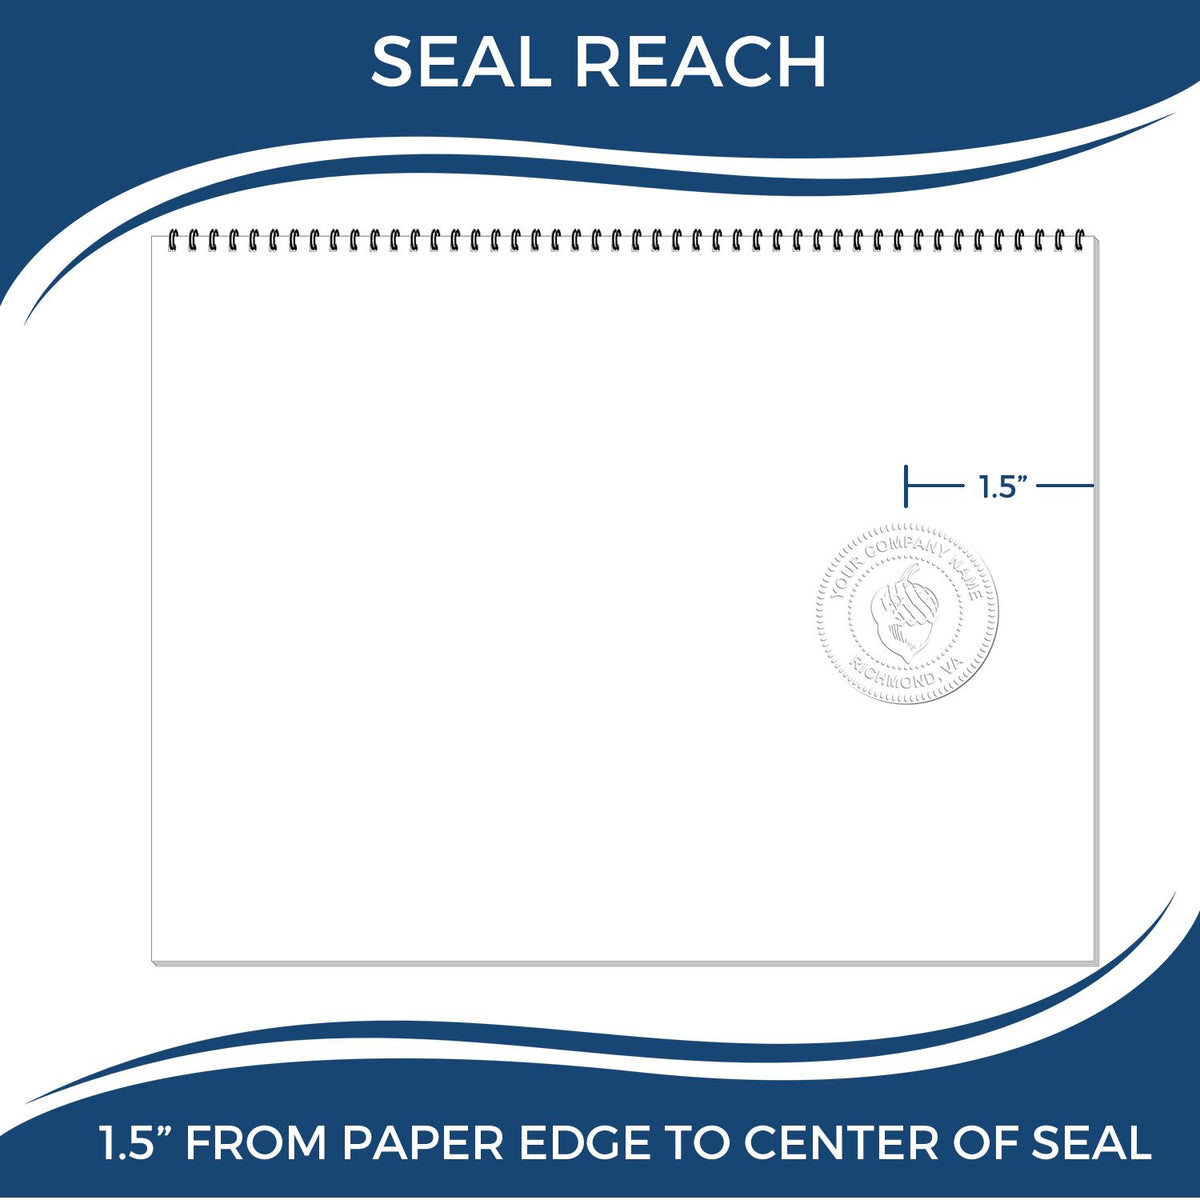 An infographic showing the seal reach which is represented by a ruler and a miniature seal image of the Handheld Florida Professional Geologist Embosser